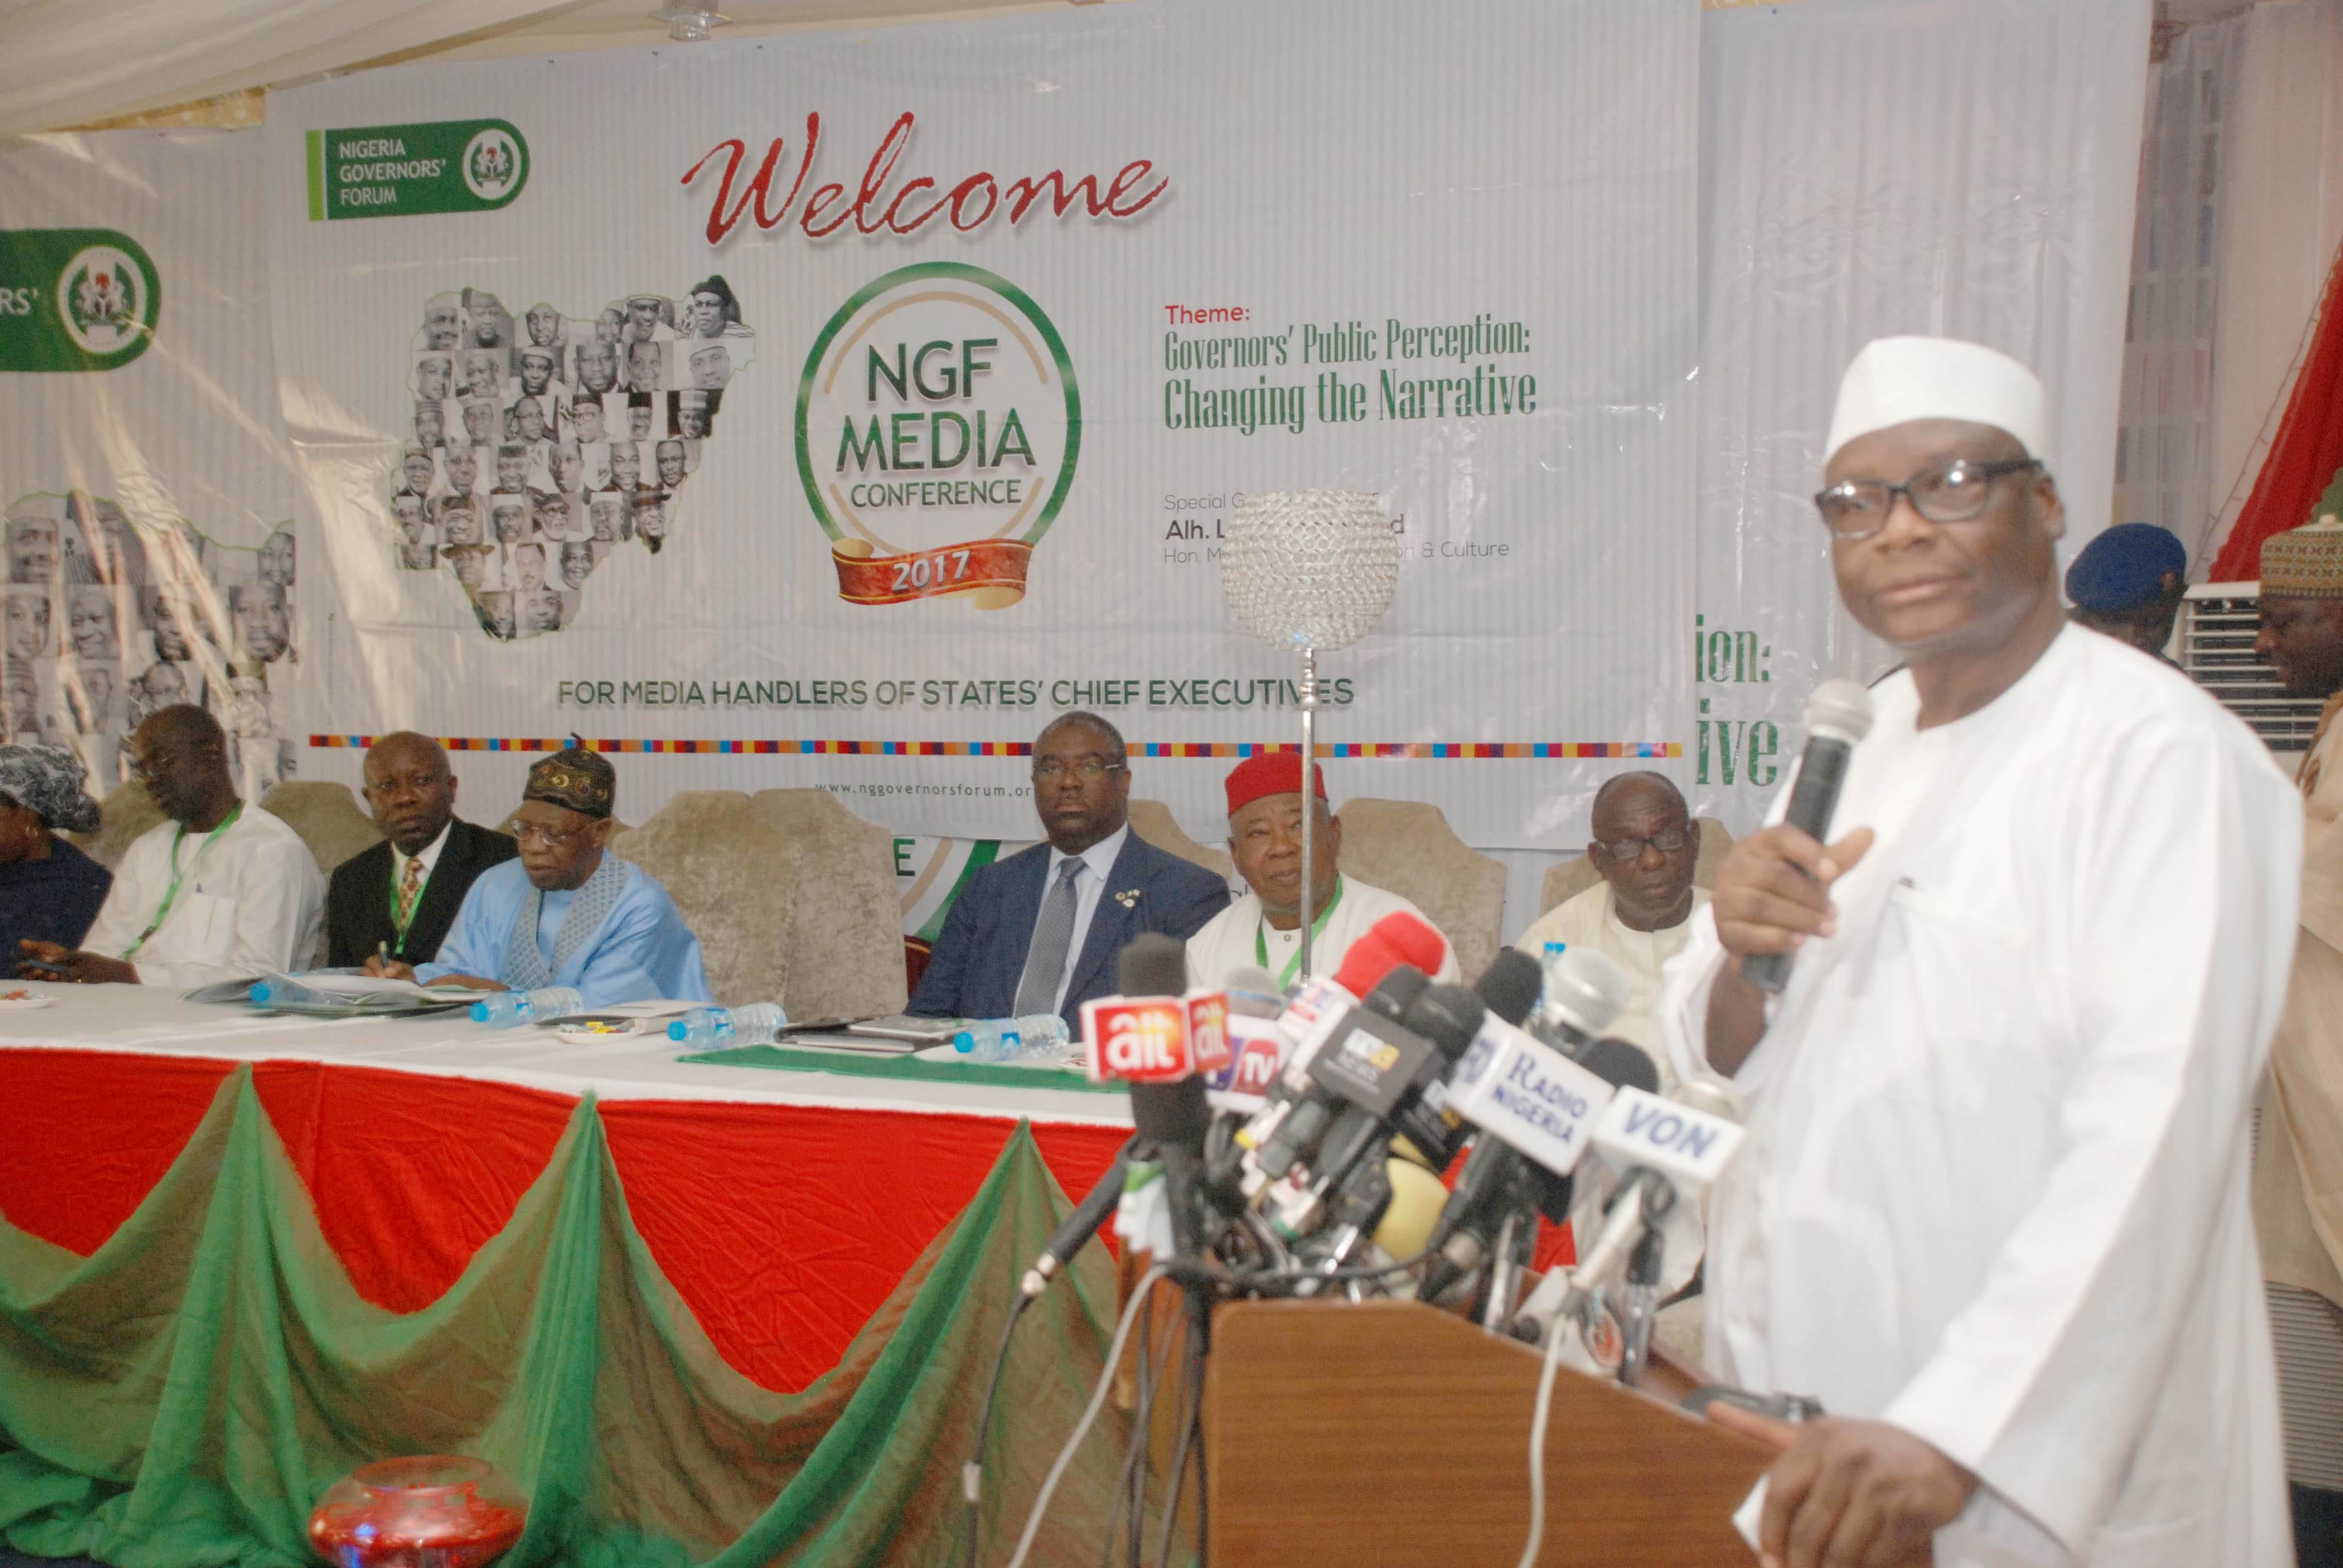 The NGF Media Conference 2017